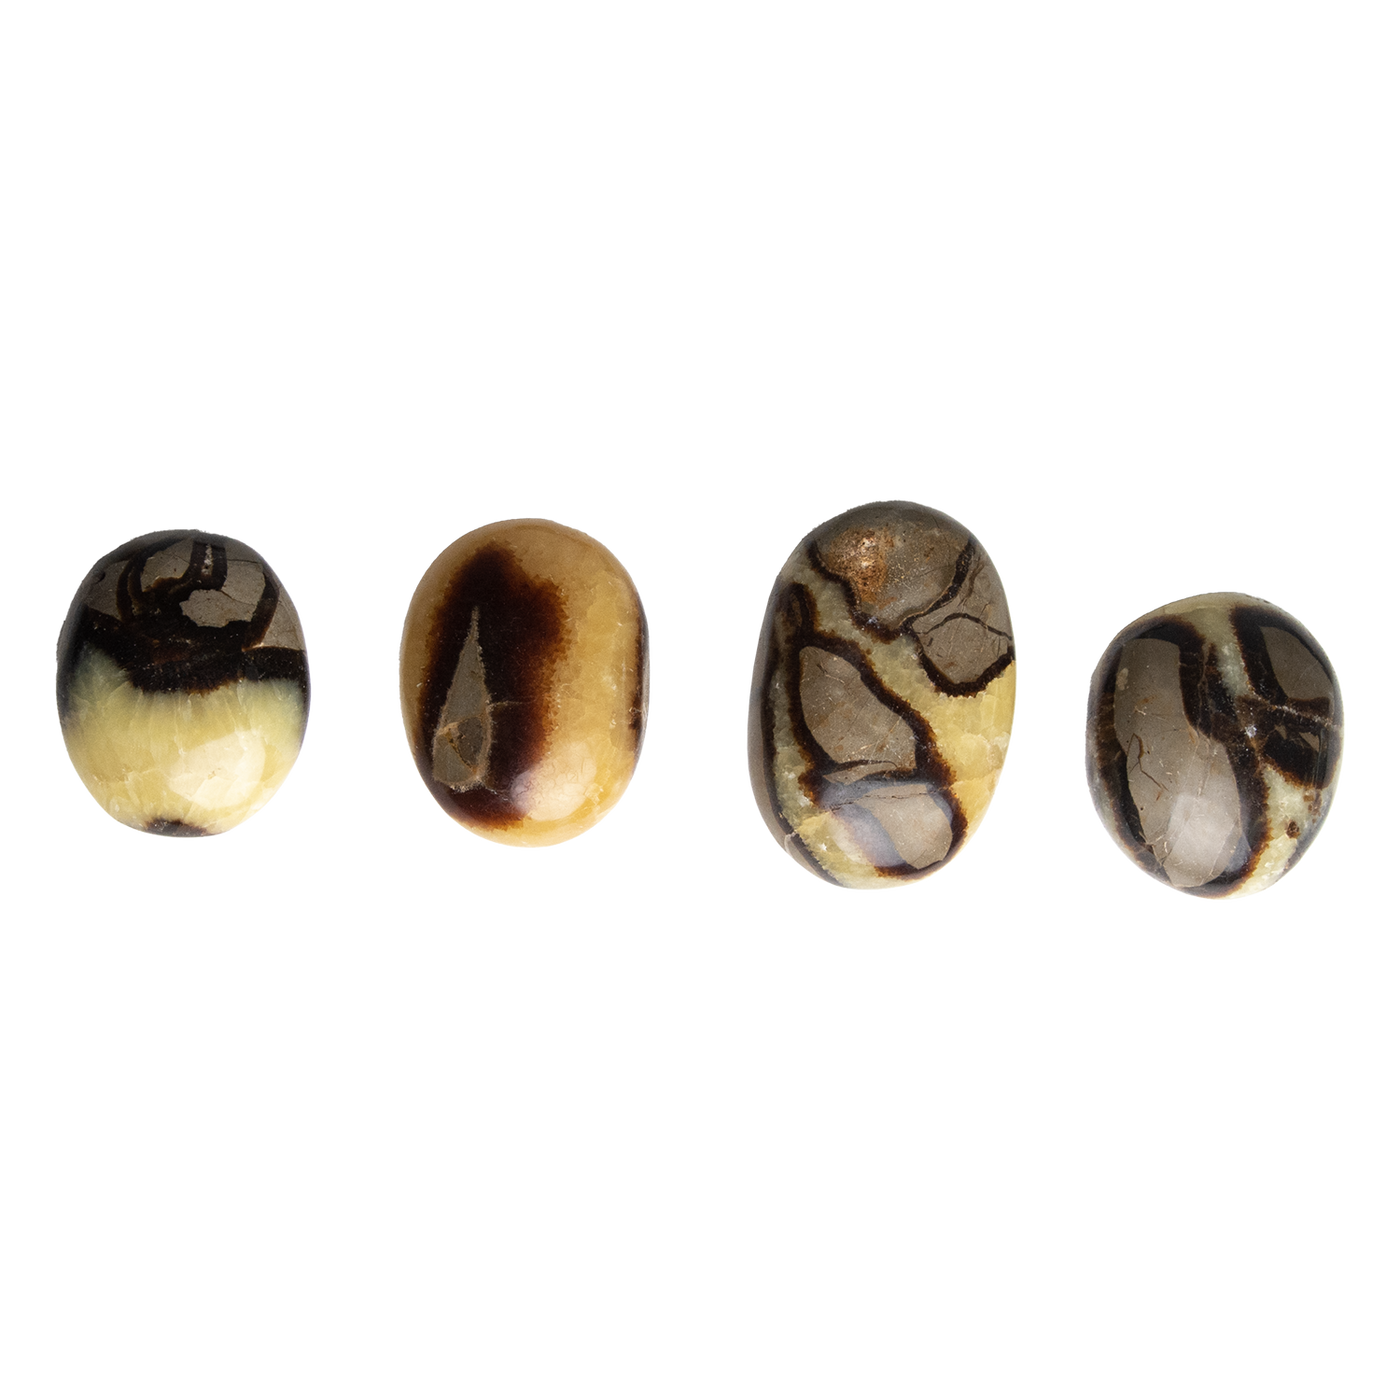 4 different large Septarian touchstones by Energy Muse illustrating the variety of sizes, colors, shapes and patterns.